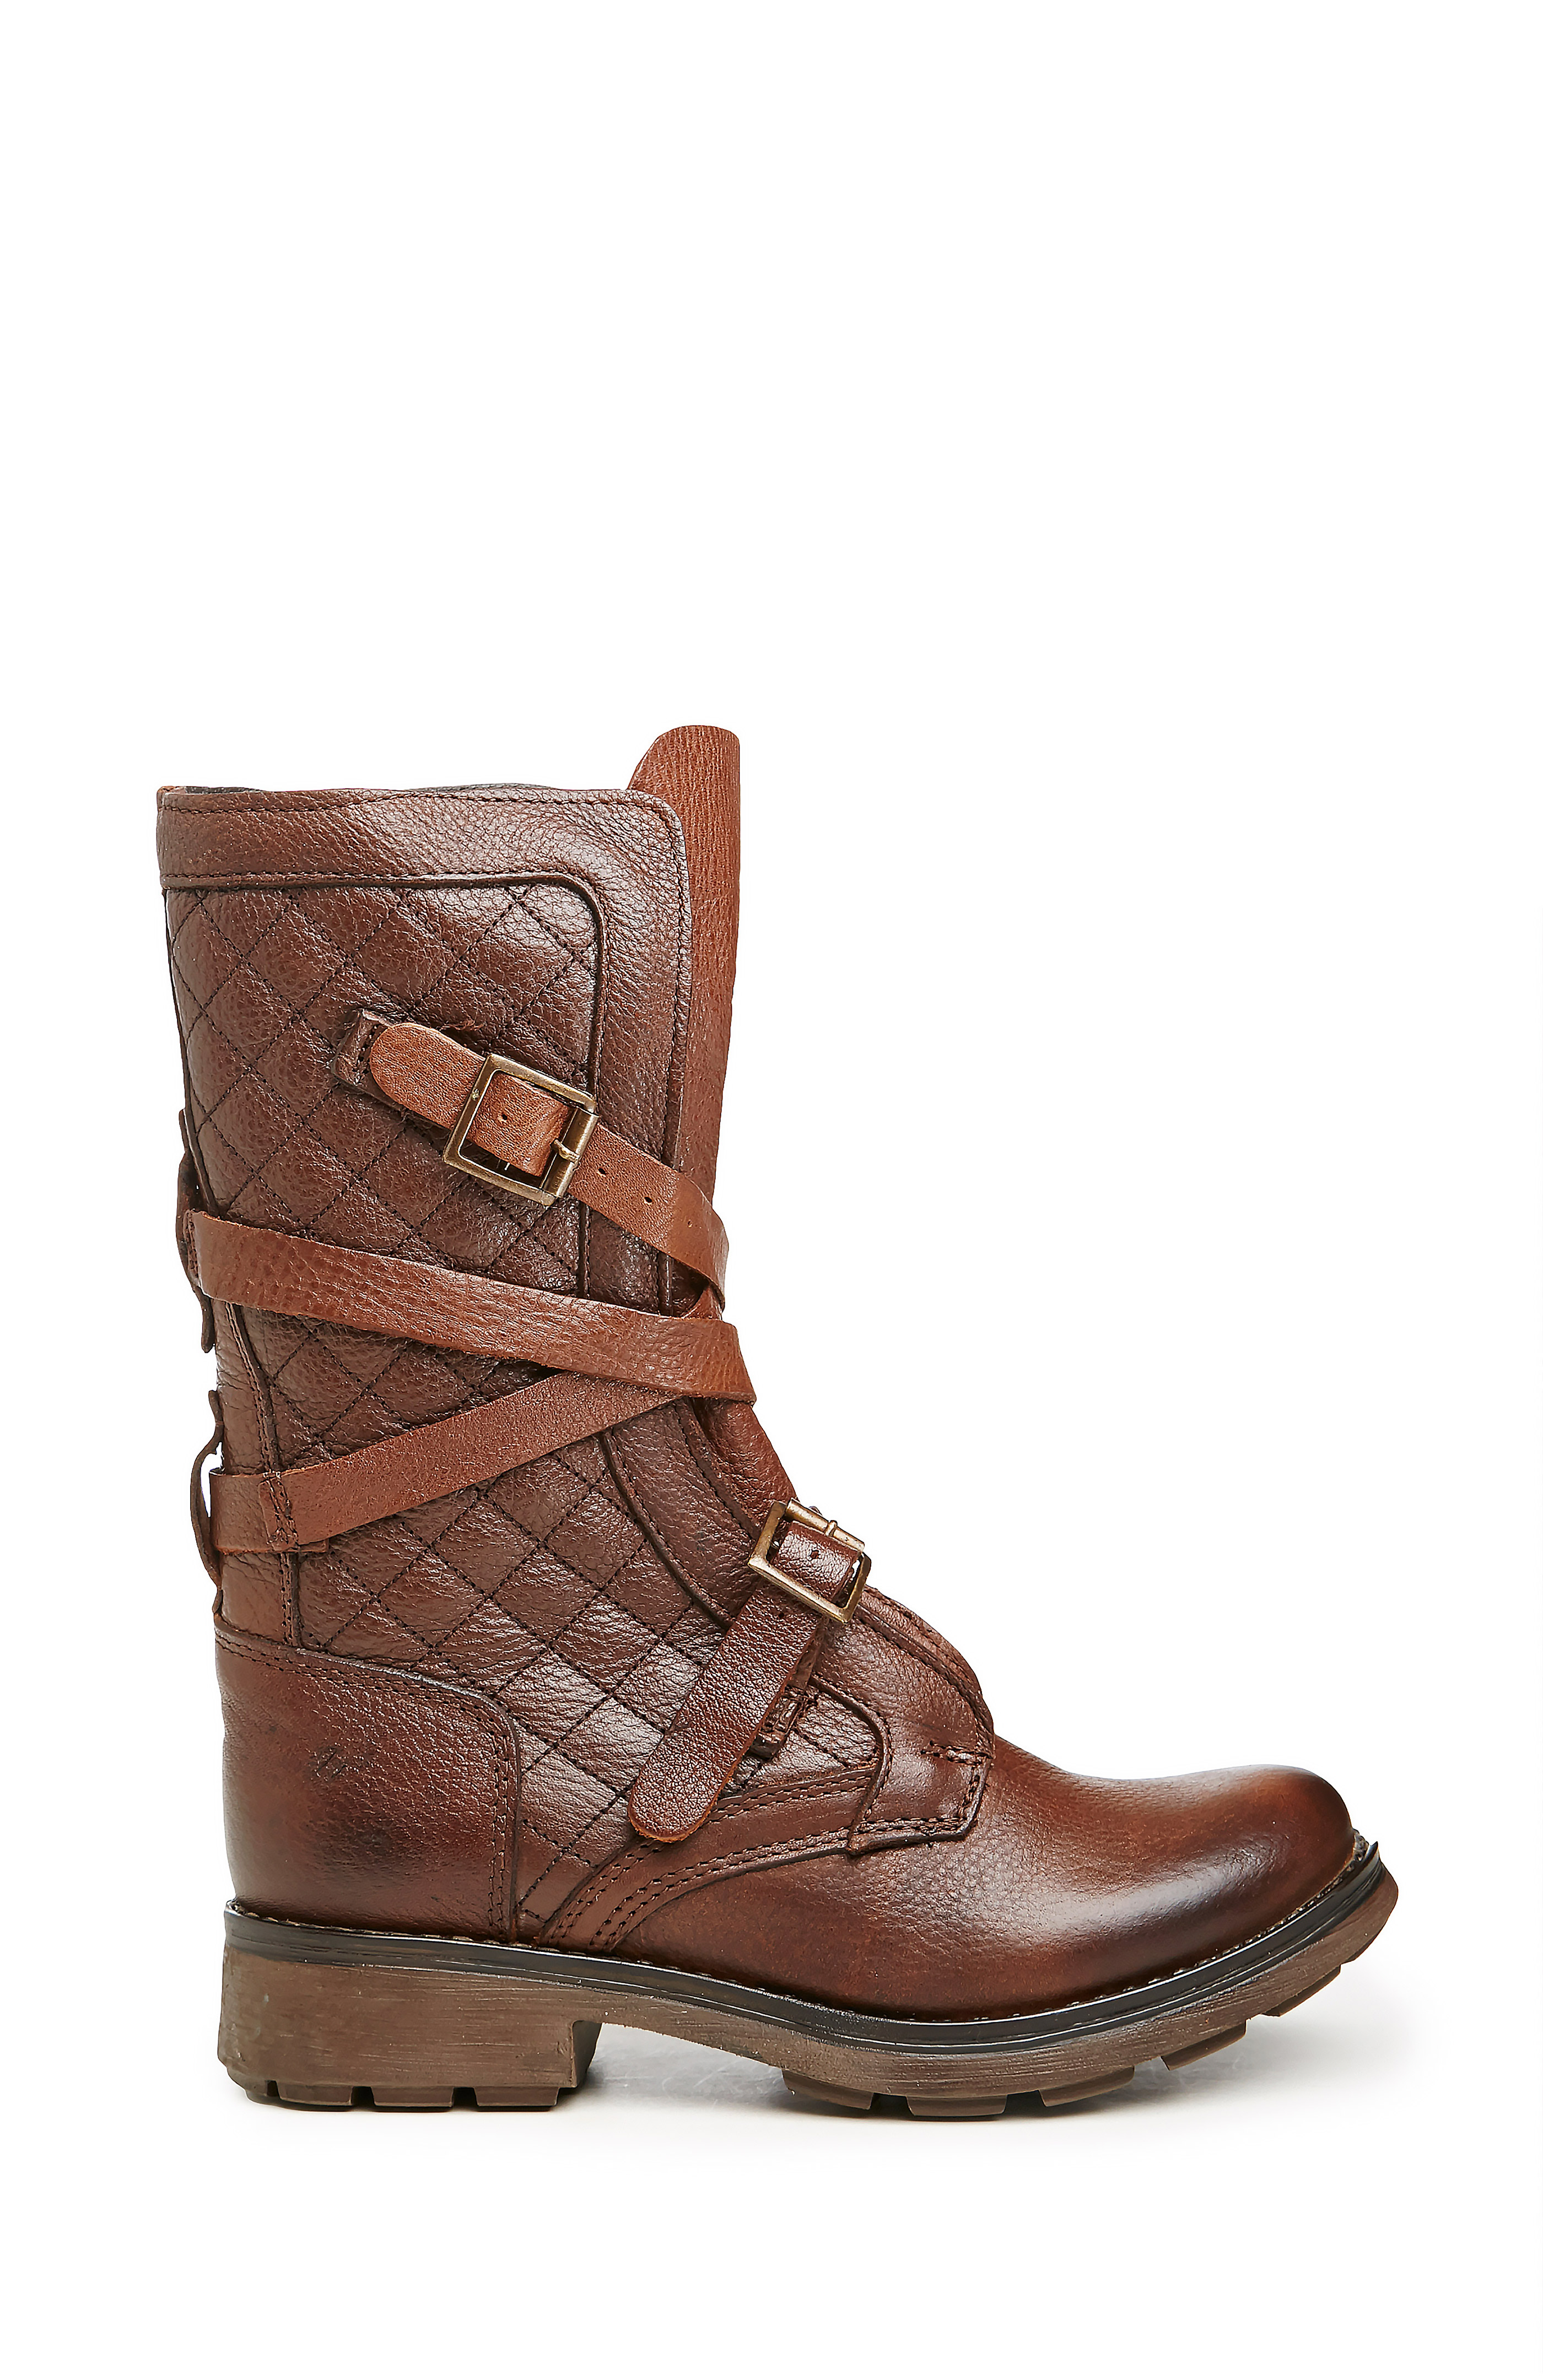 Steve Madden Bounti Quilted Boots in 